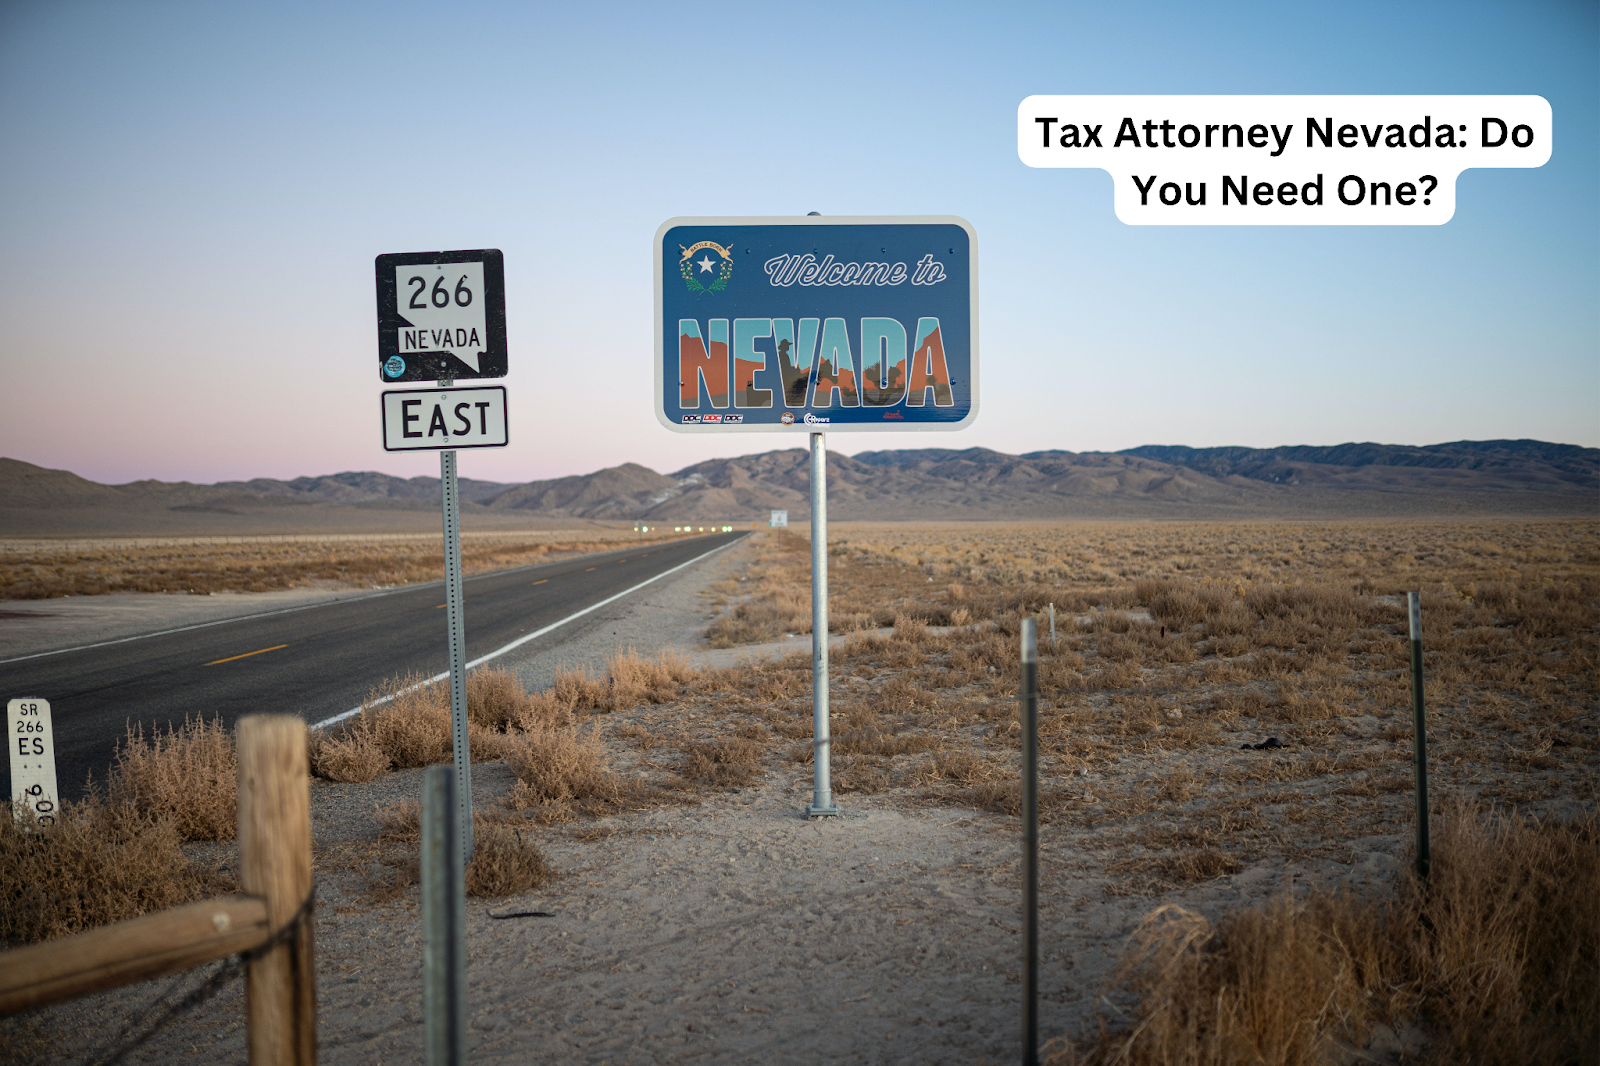 Tax Attorney Nevada: Do You Need One?